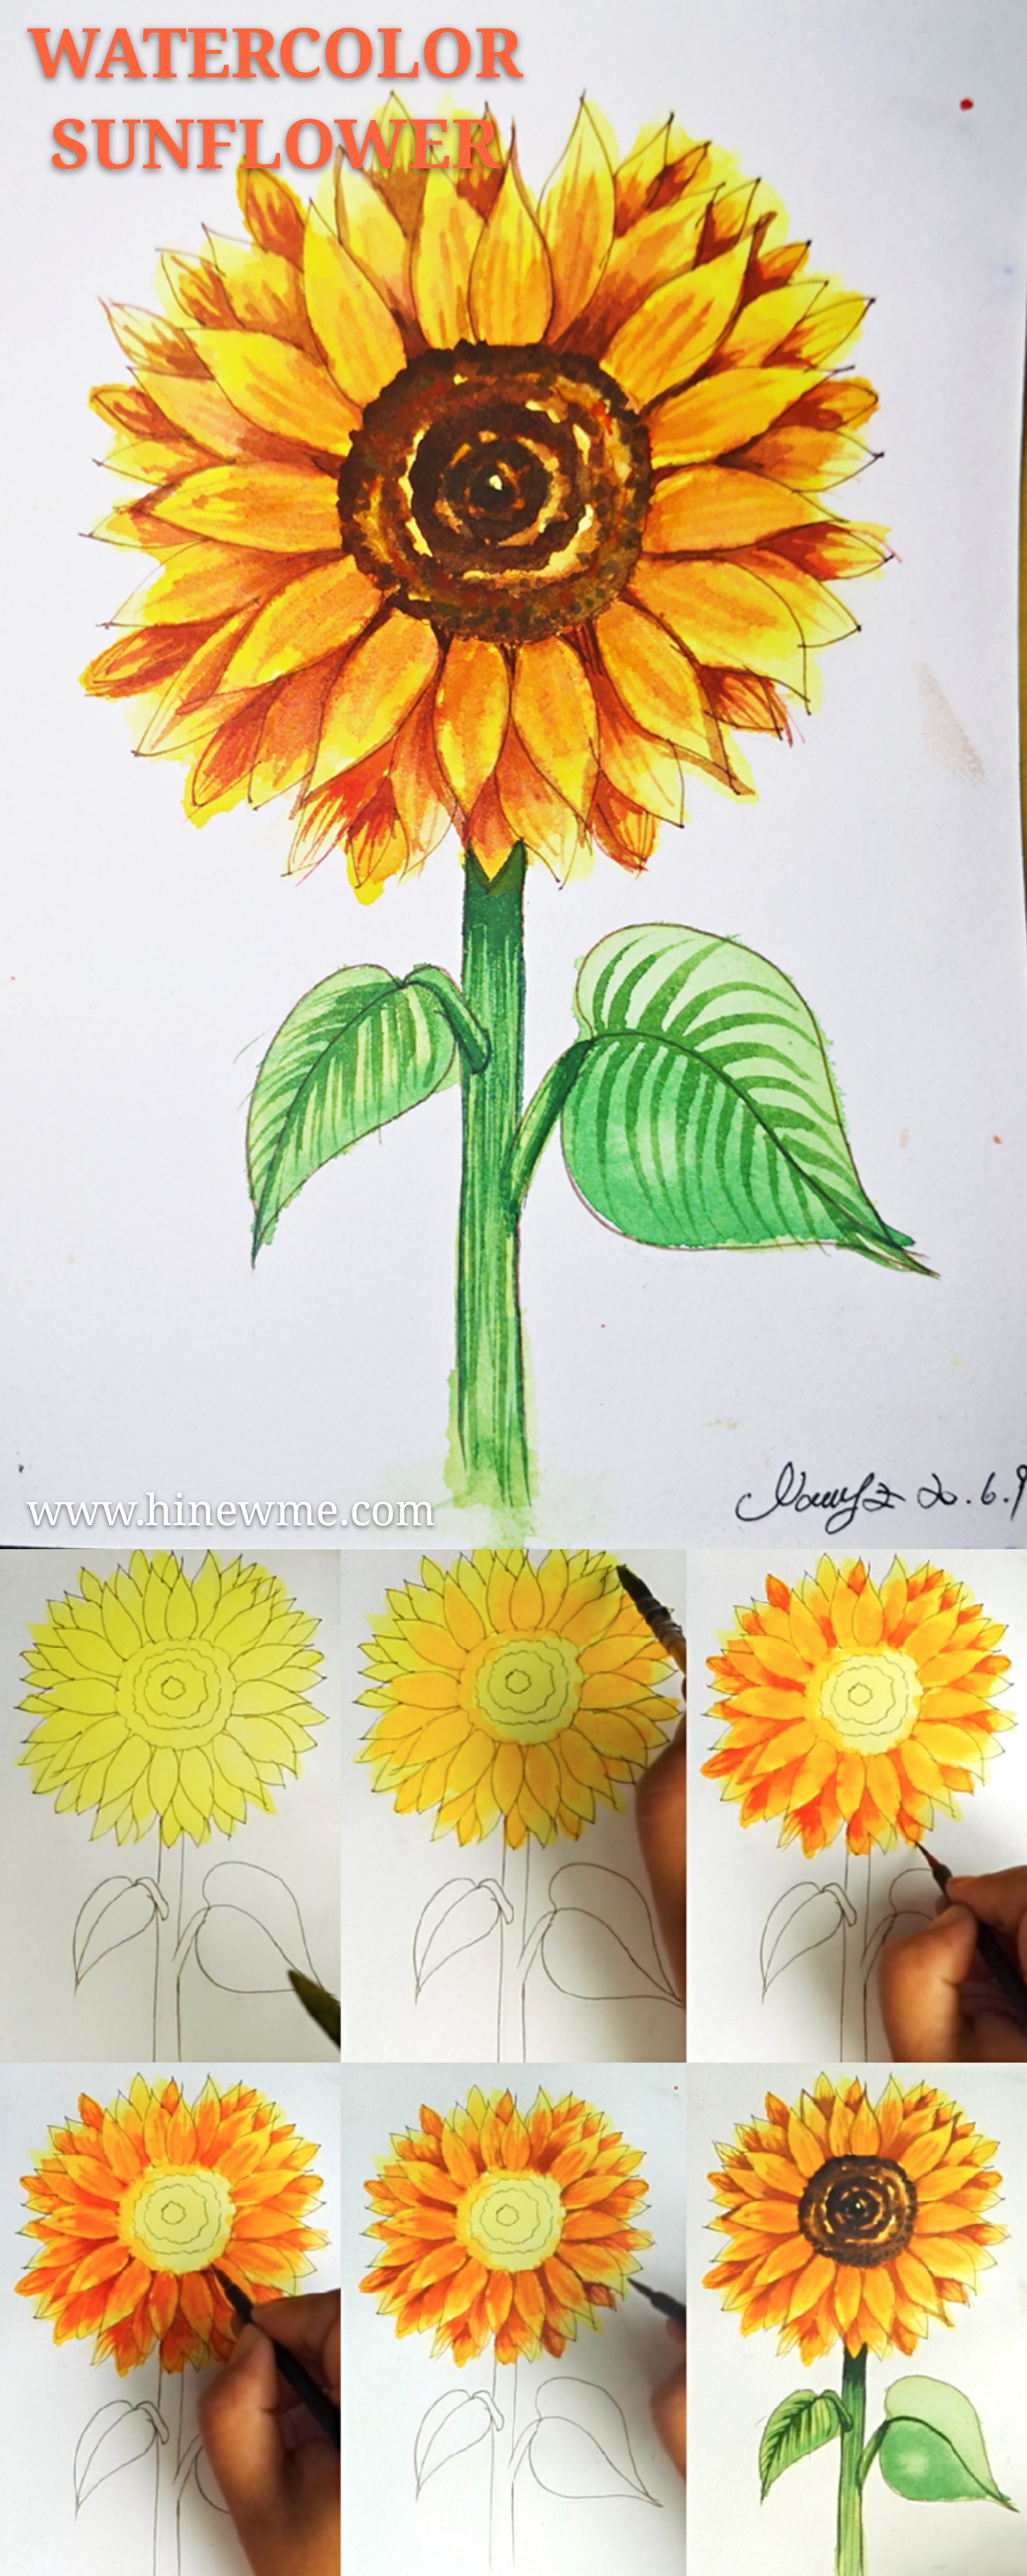 Super easy How to draw a sunflower with Watercolor and basic line tutorial step by step